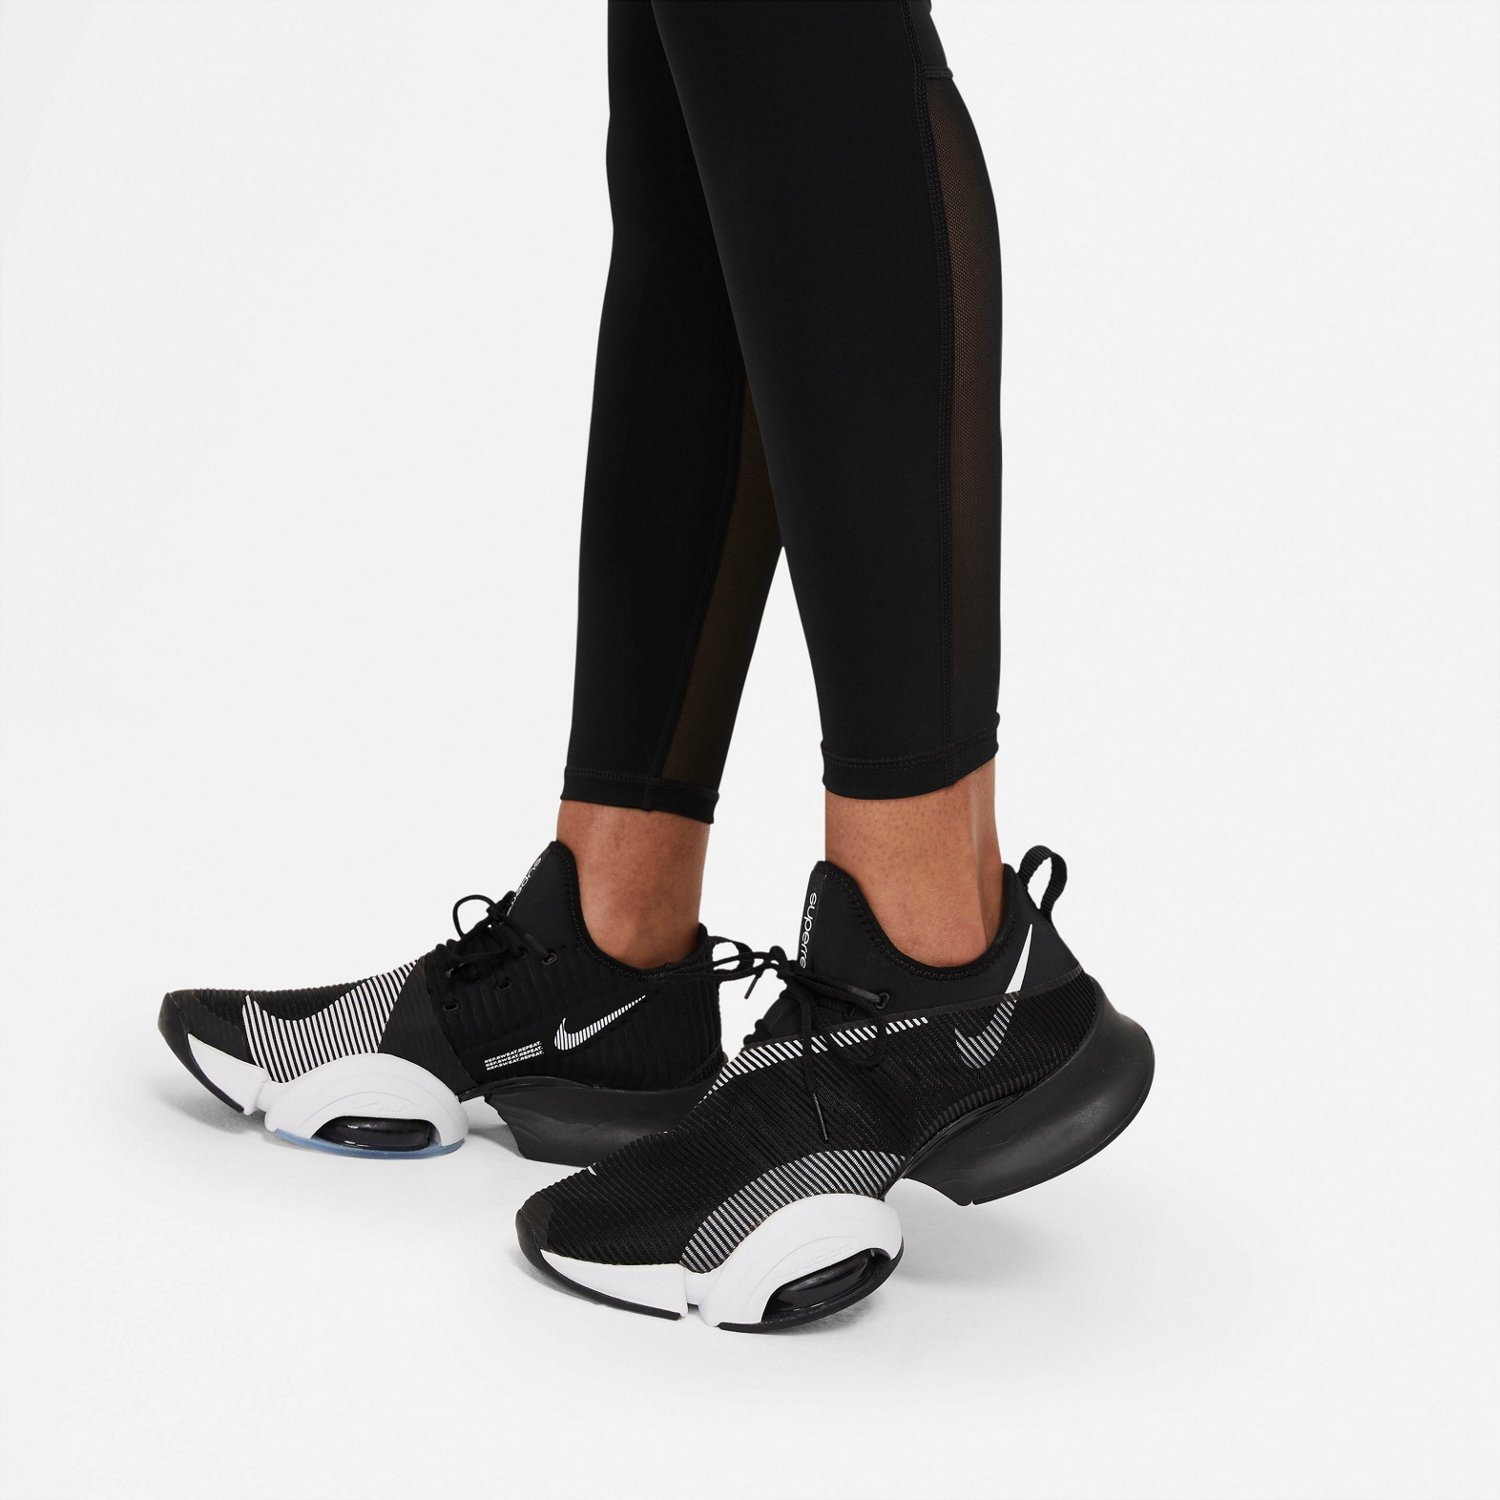 Nike Women'sPro 365 Tights | Free Shipping at Academy